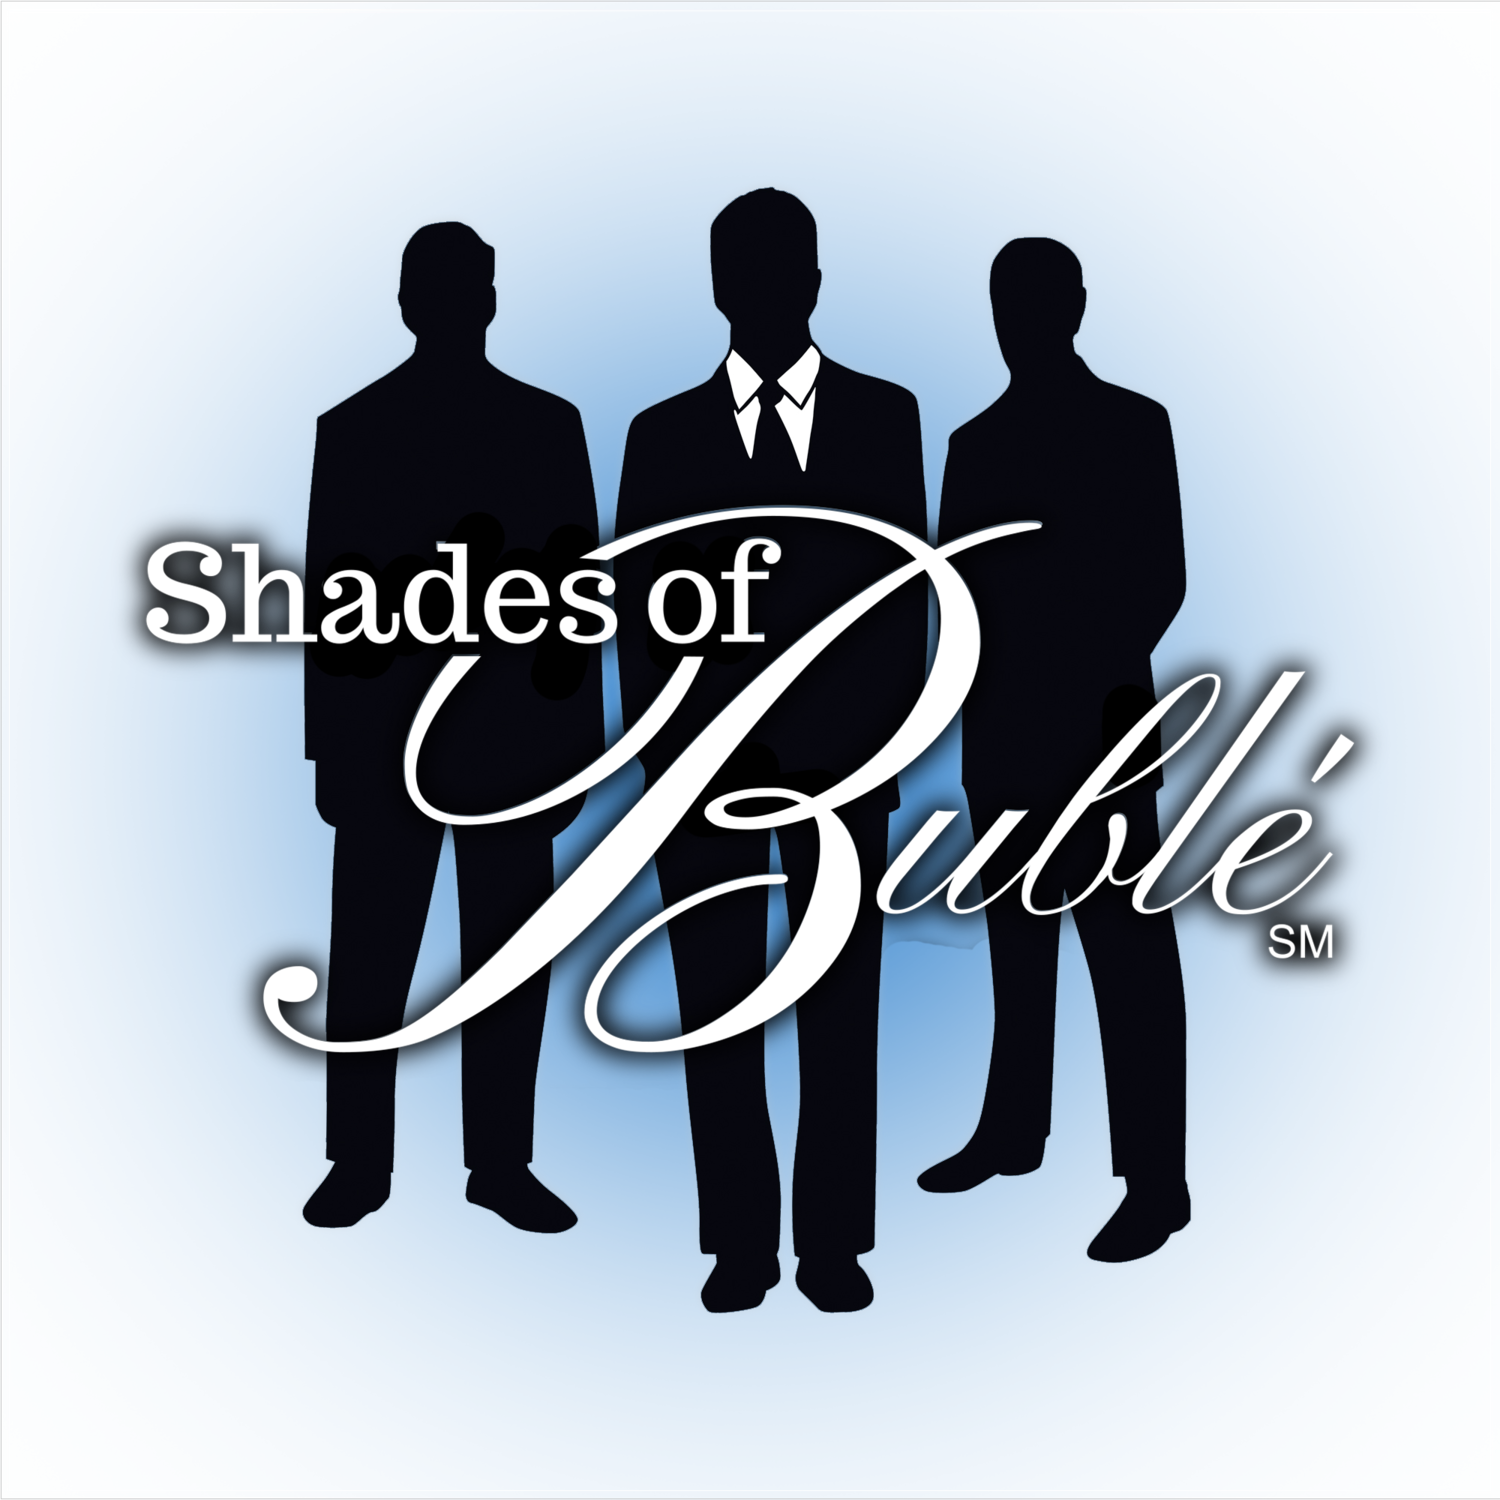 SHADES OF BUBLÉ